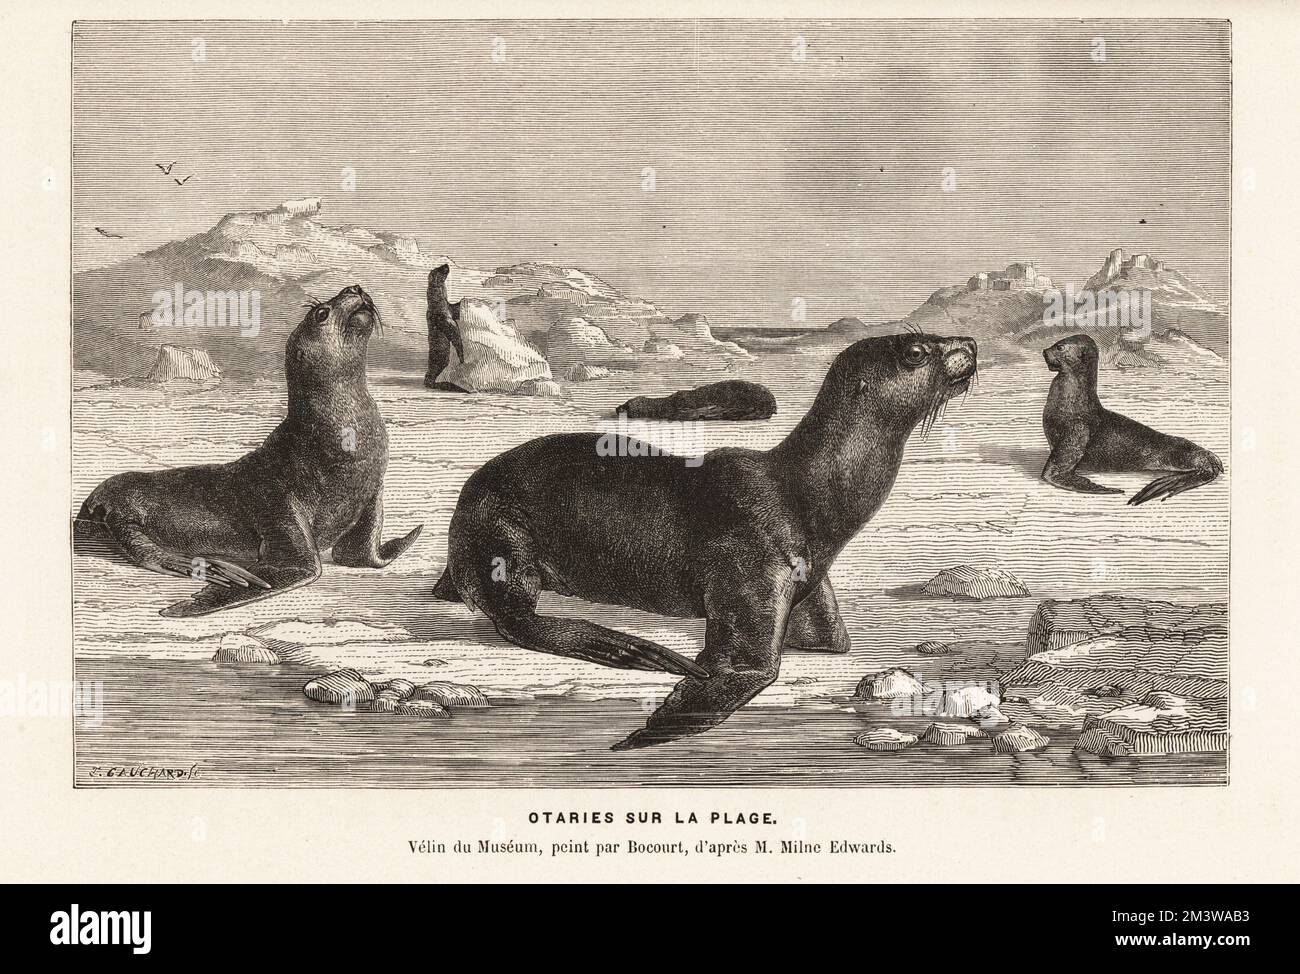 South American sea lions, Otaria flavescens, formerly Otaria byronia, basking on a beach. Otaries sur la plage. Velin du museum, peint par Bocourt, d'apres Milne-Edwards. Woodcut by Marie Firmin Bocourt after Henri Milne-Edwards from Alfred Fredol’s Le Monde de la Mer, the World of the Sea, edited by Olivier Fredol, Librairie Hachette et. Cie., Paris, 1881. Alfred Fredol was the pseudonym of French zoologist and botanist Alfred Moquin-Tandon, 1804-1863. Stock Photo